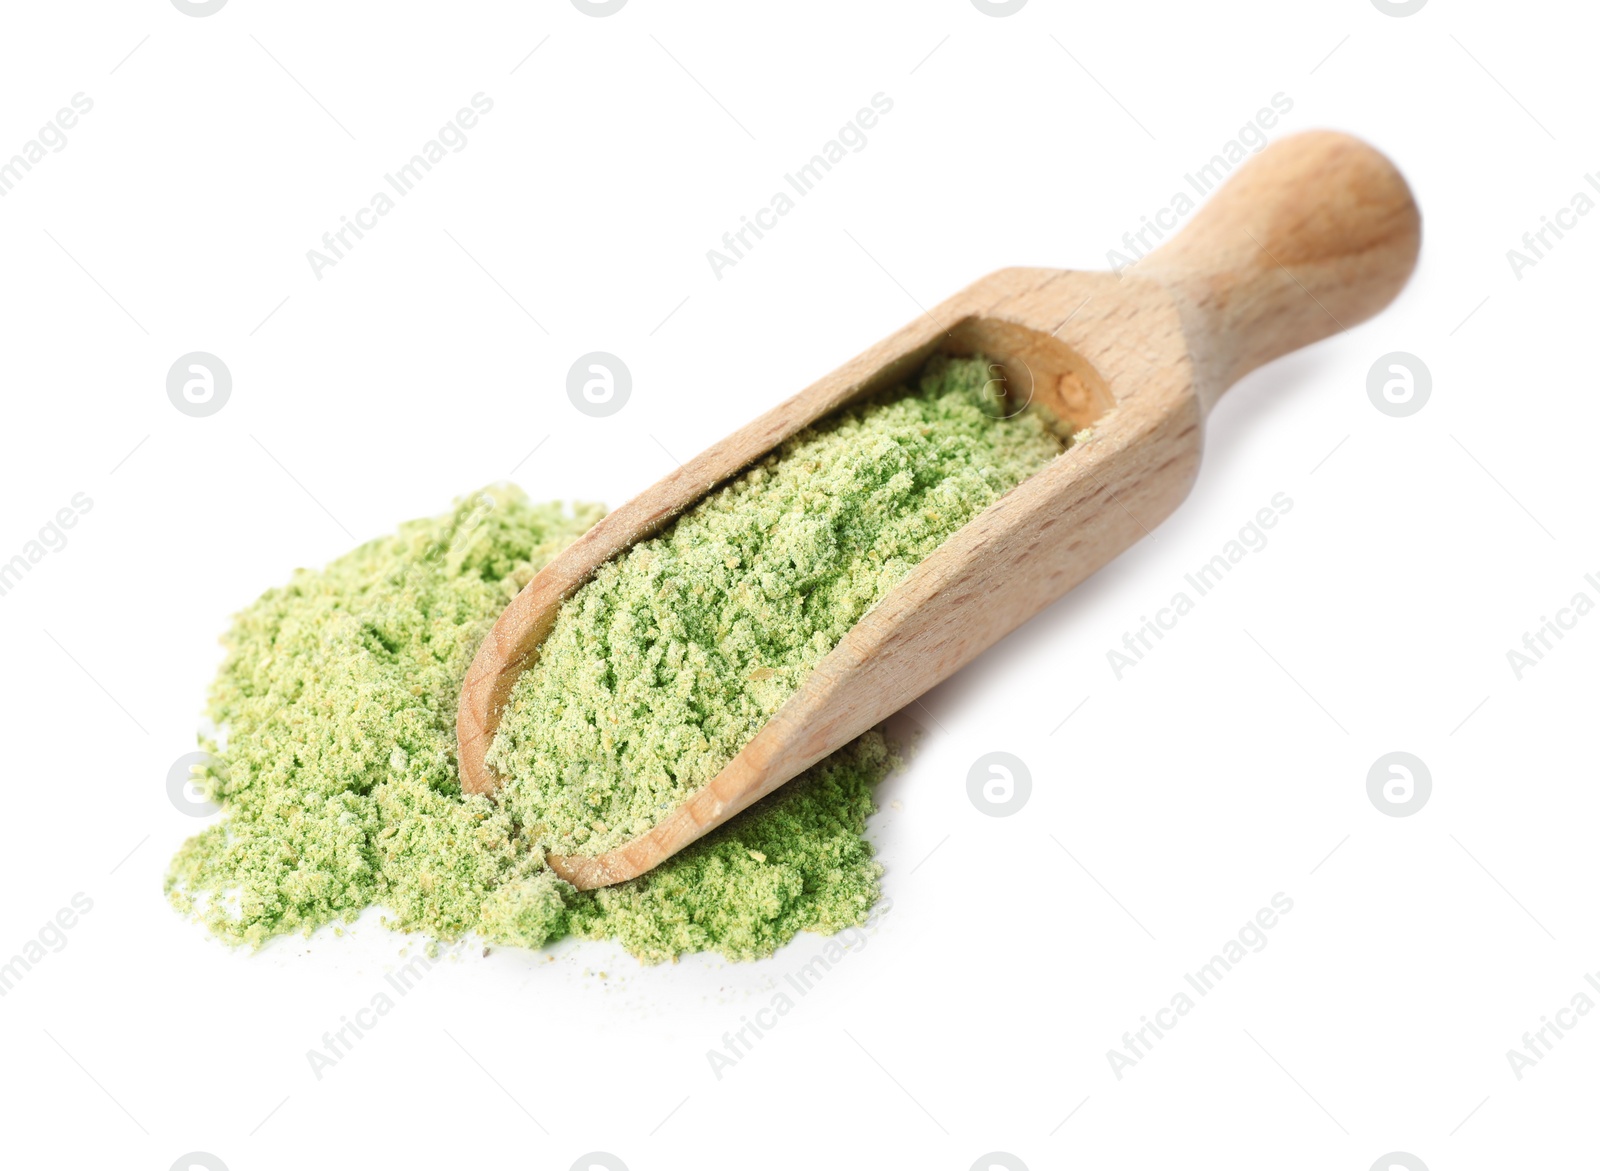 Photo of Scoop of hemp protein powder isolated on white